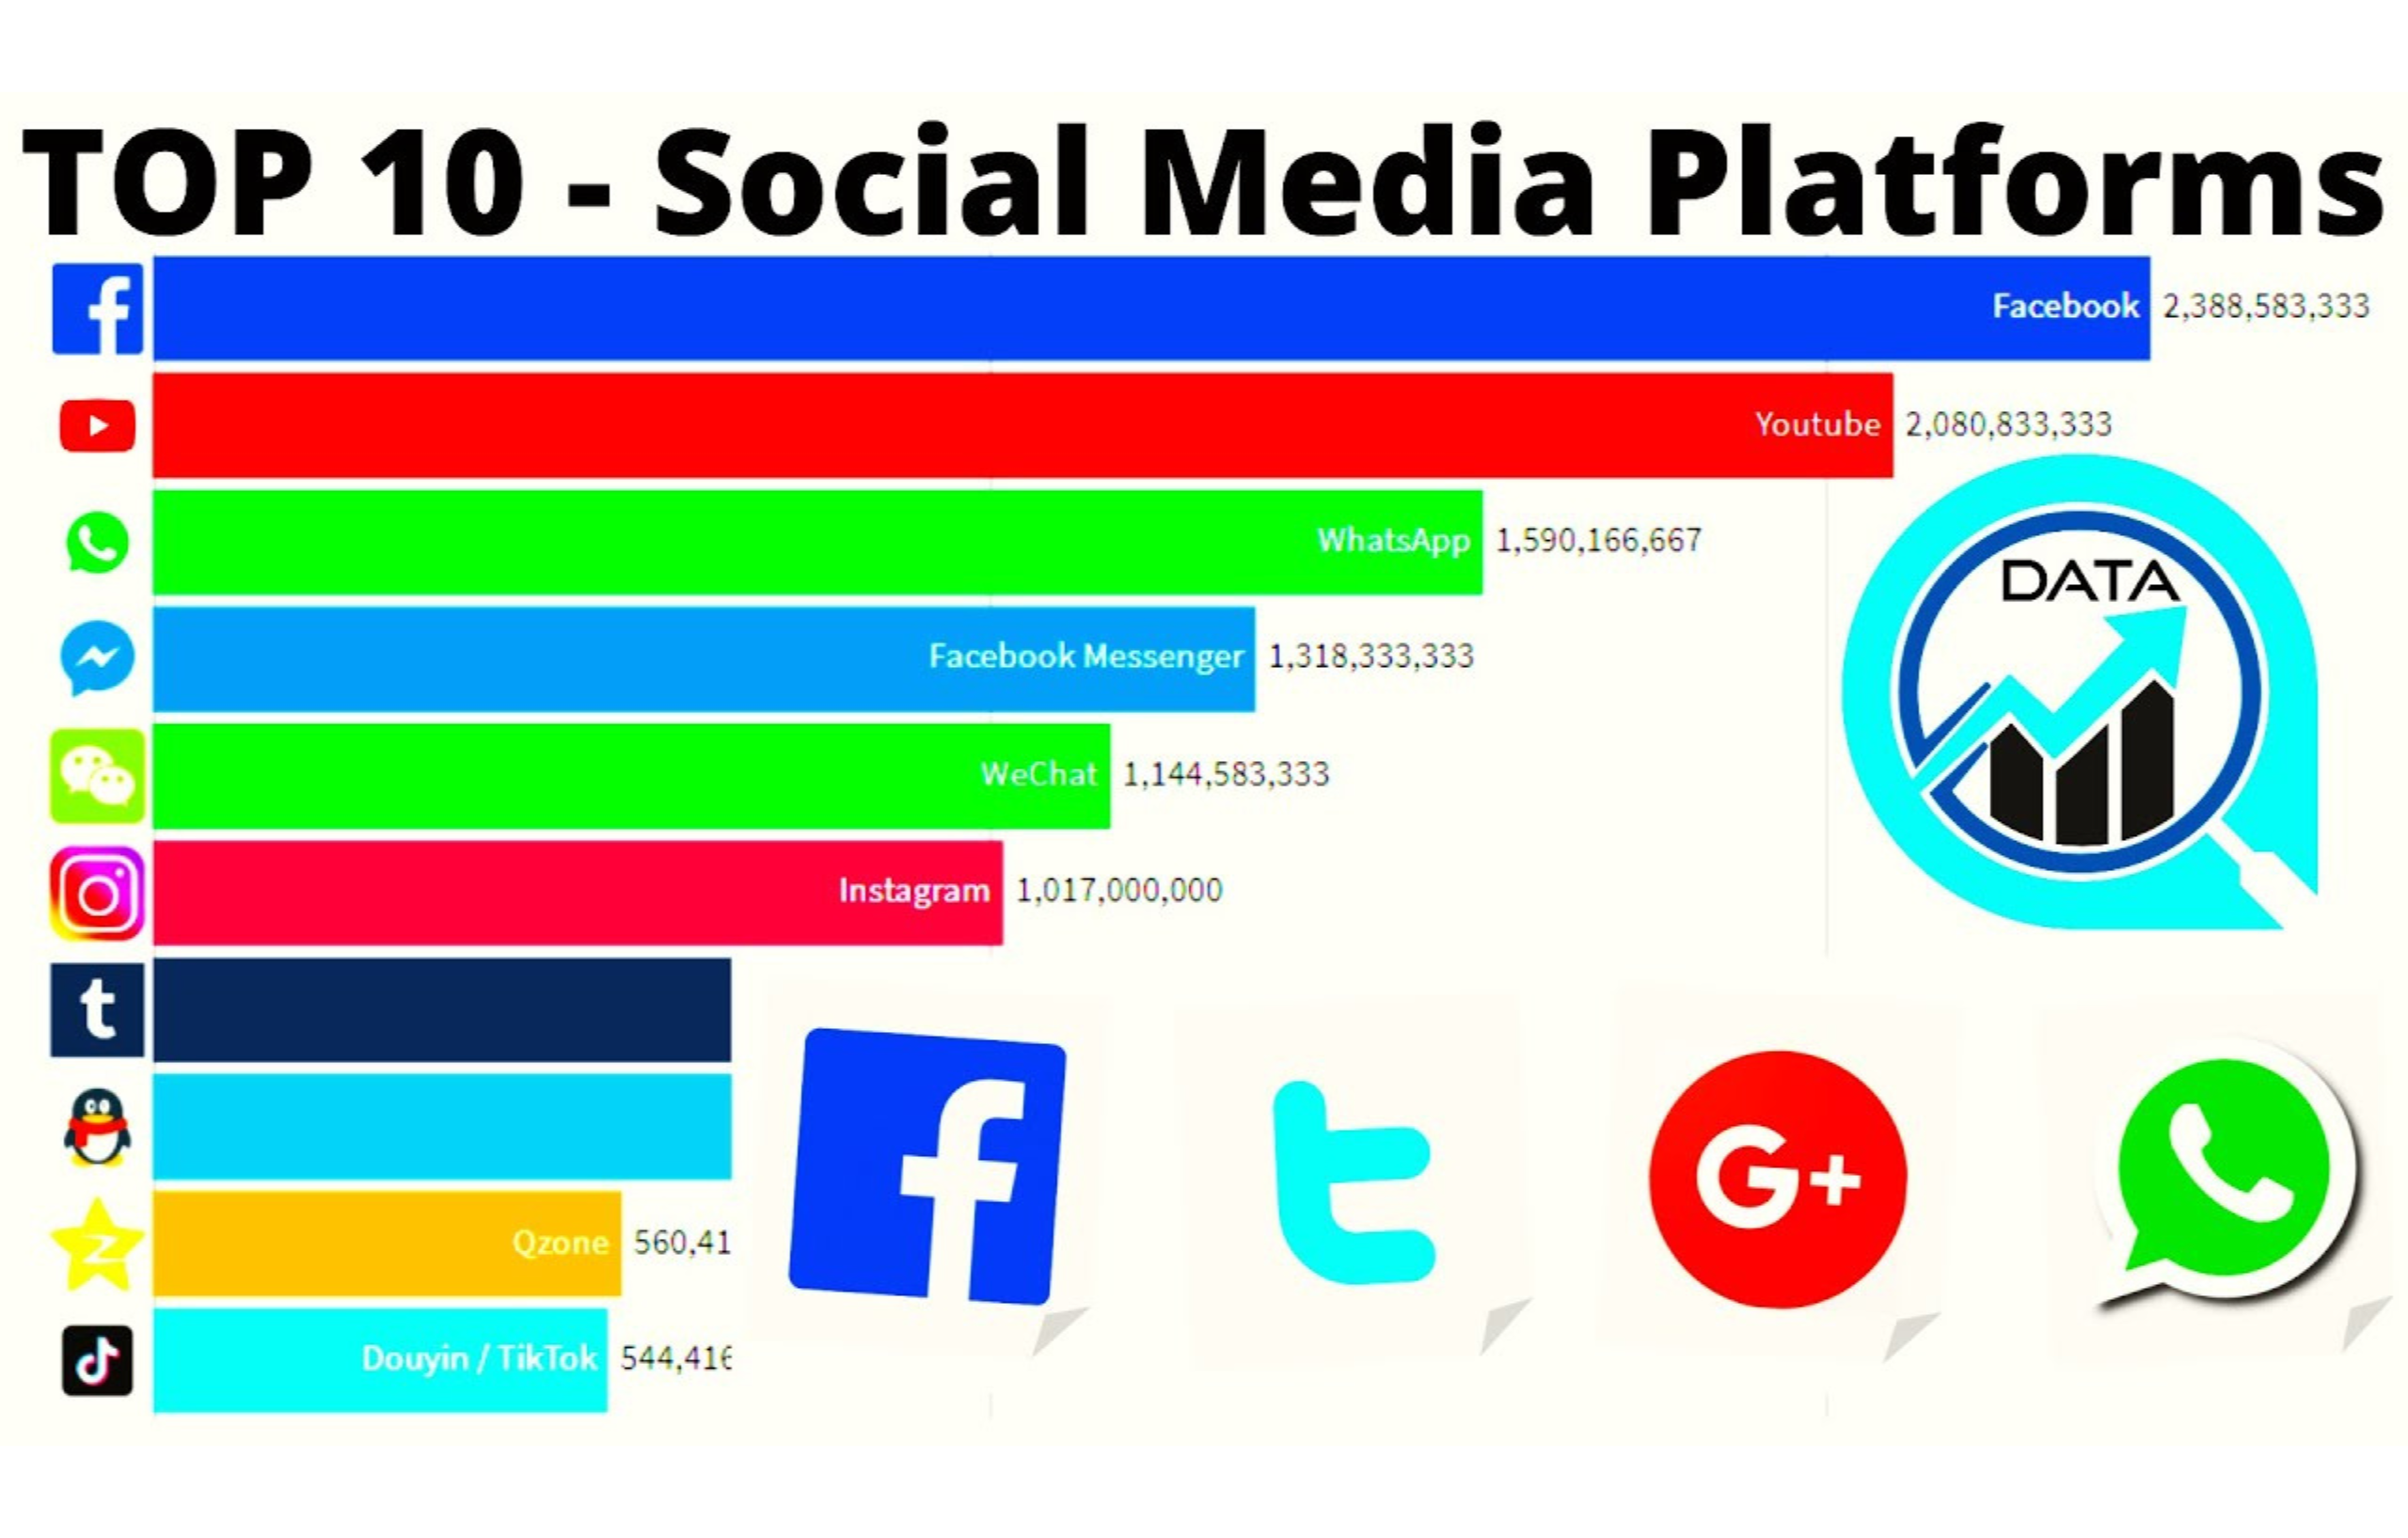 newness kugle halvt The Top 10 Social Media Sites and Platforms | DY Tech